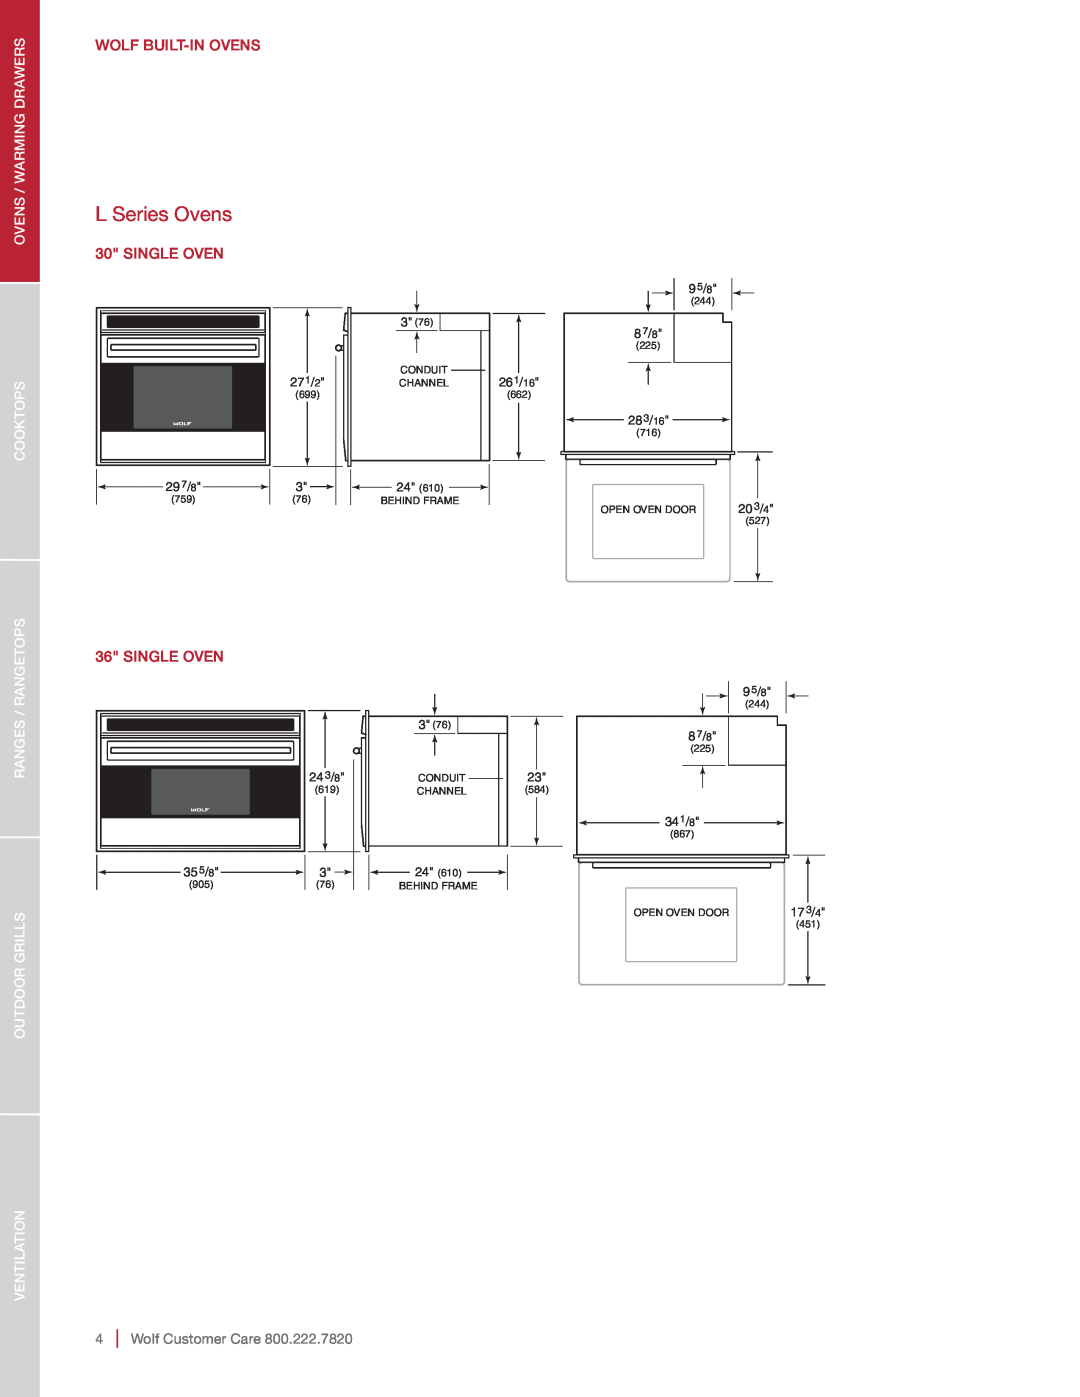 Sub-Zero DO30-2U/S-TH DO30TE/S/TH manual L Series Ovens, Warming Drawers, Wolf Built-In Ovens, Ovens Cooktops, Single Oven 